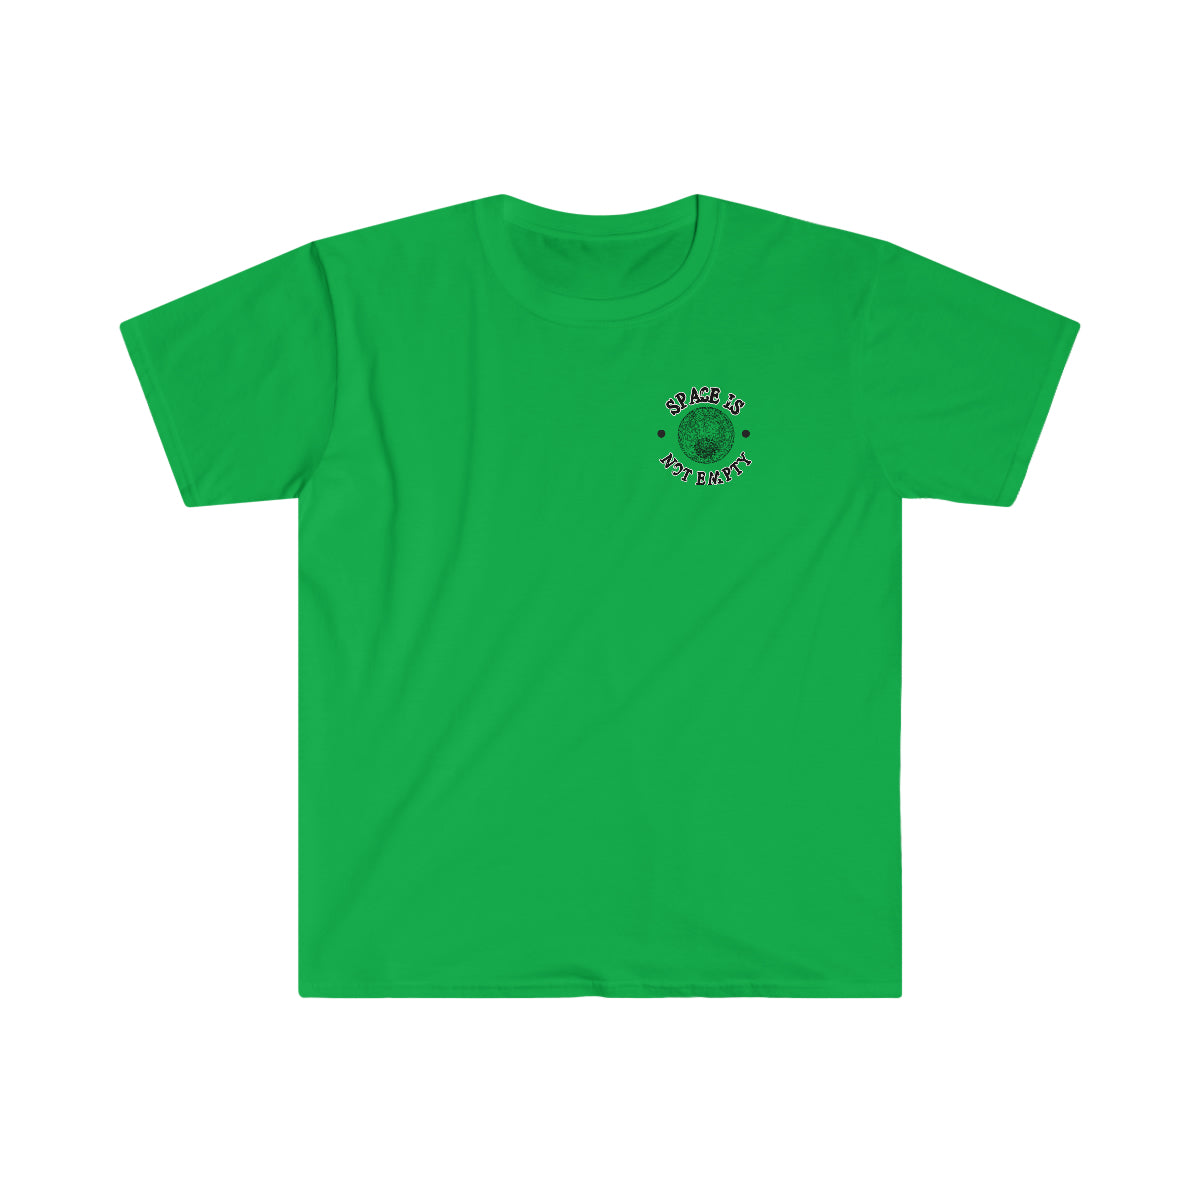 A green Apollo Docking T-Shirt with a space enthusiast logo.